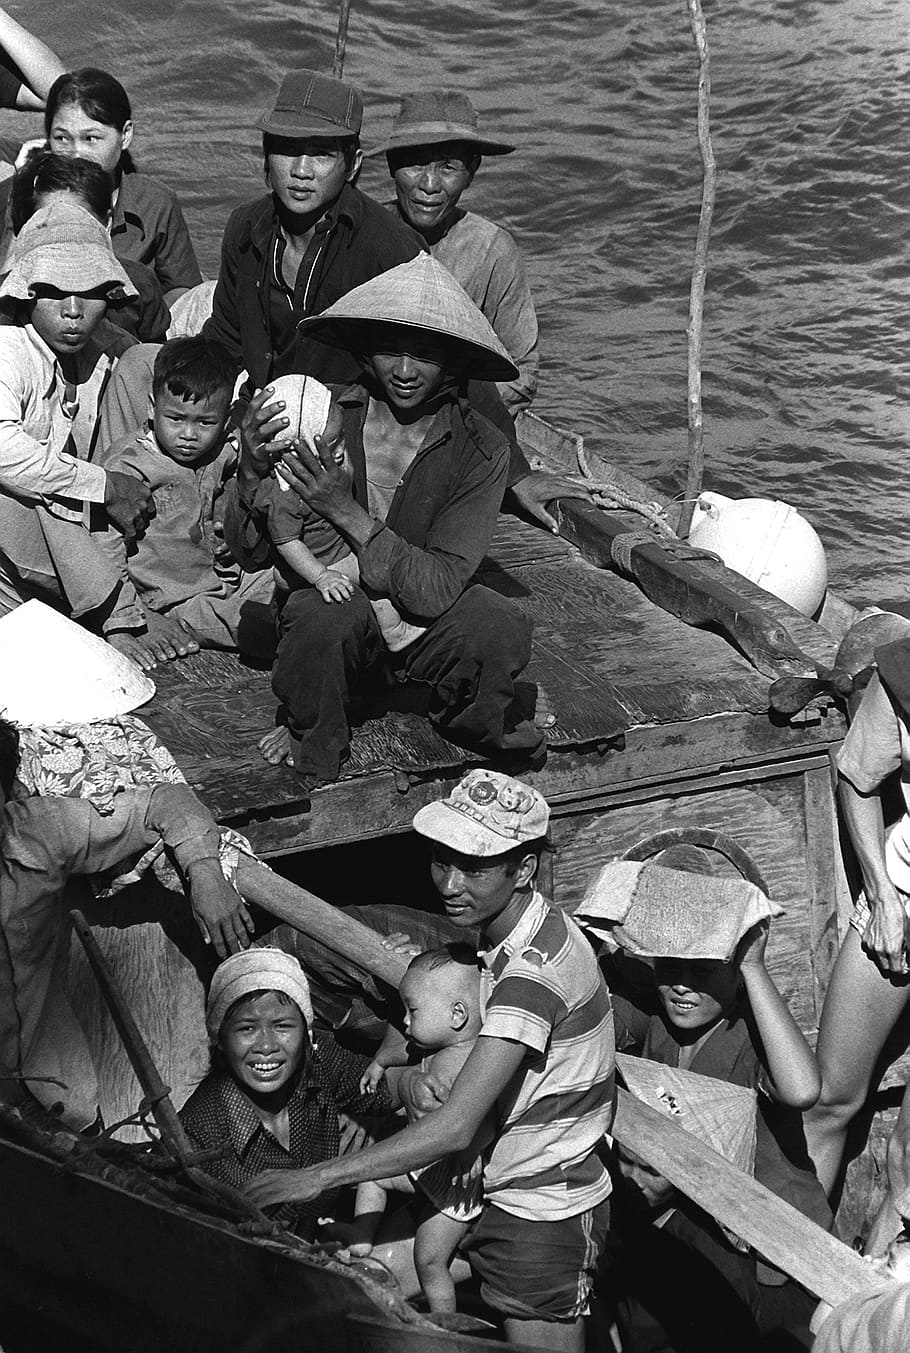 group of people riding boat, boat people, 35 vietnamese refugees